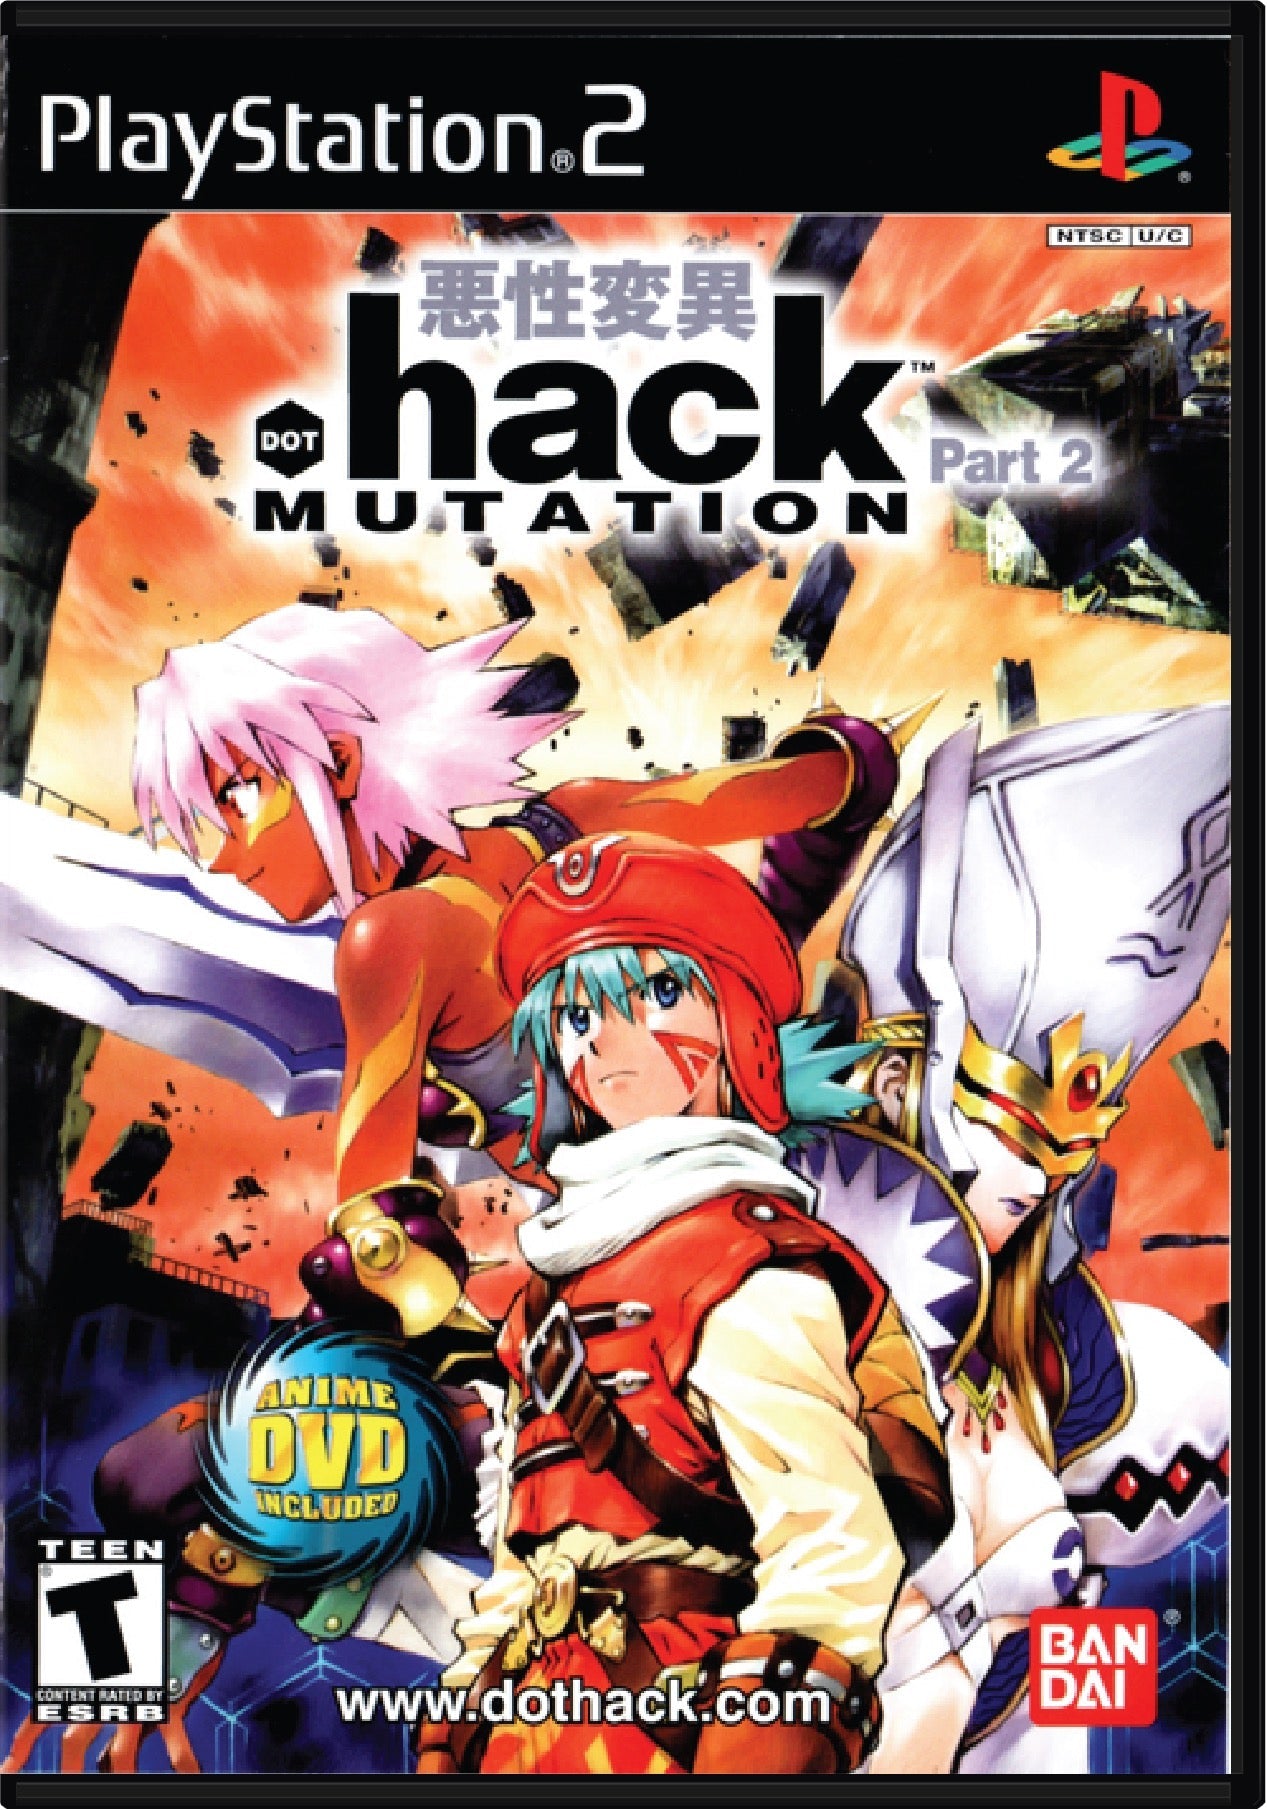 .hack Mutation Cover Art and Product Photo